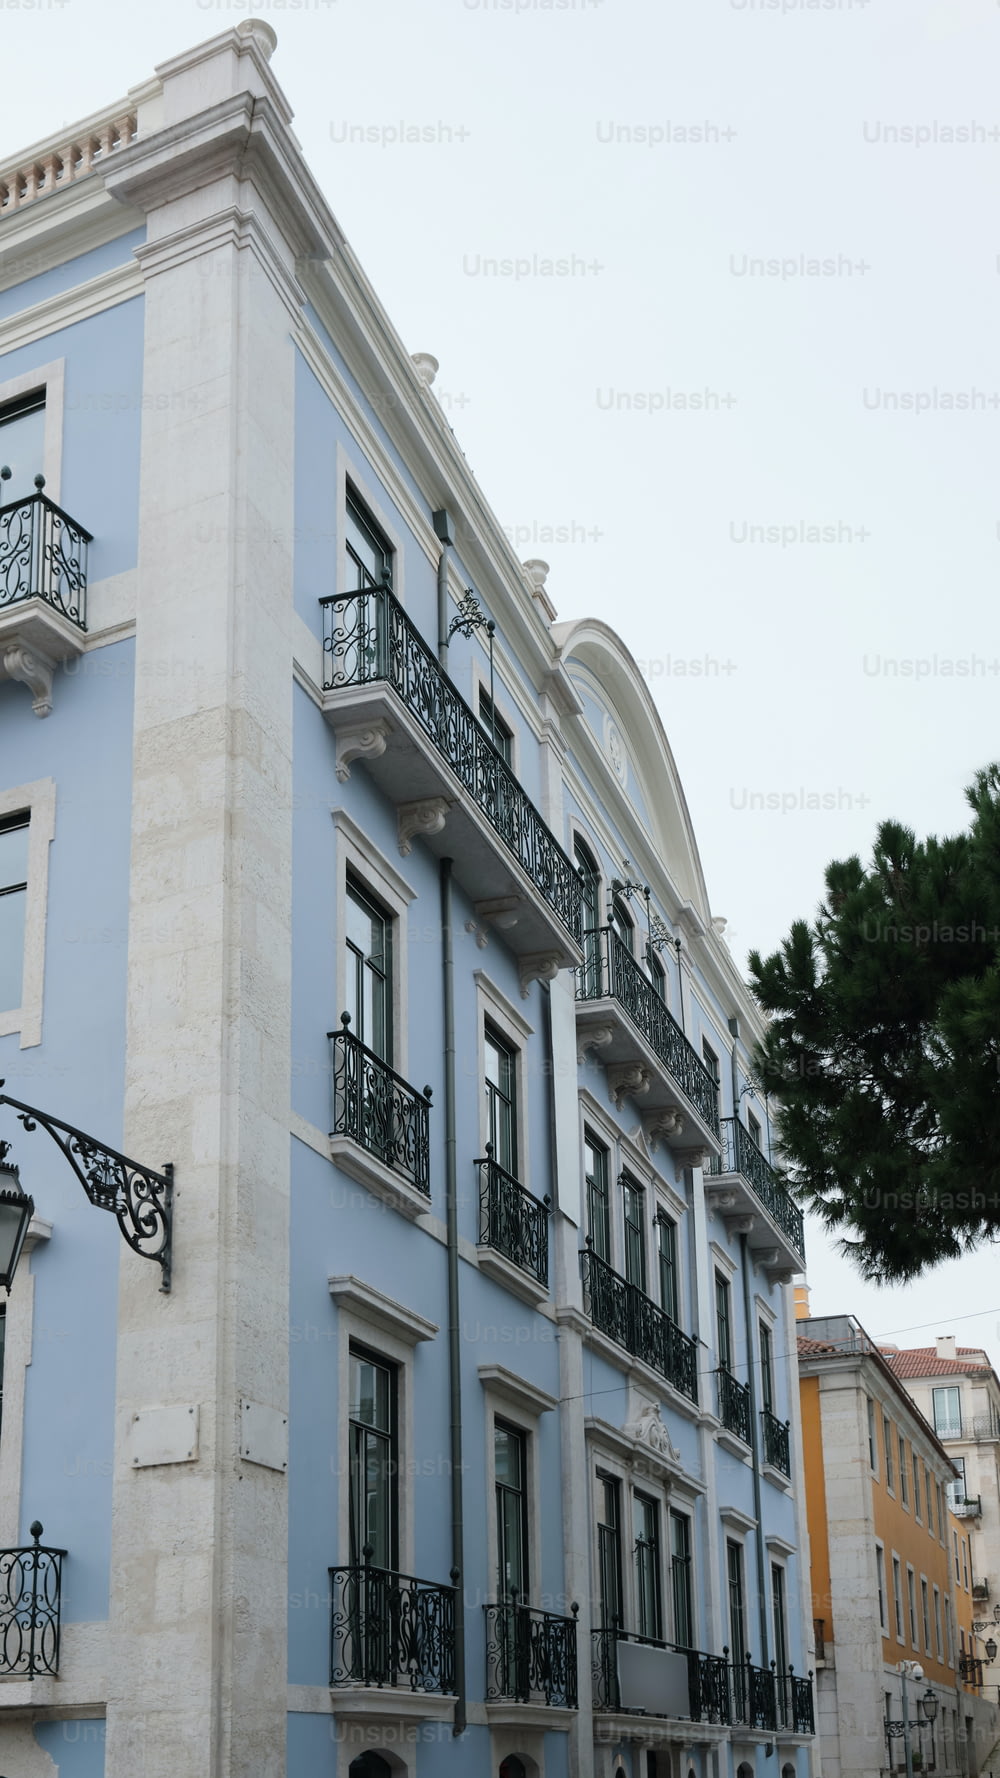 a blue and white building with balconies and wrought iron balconies